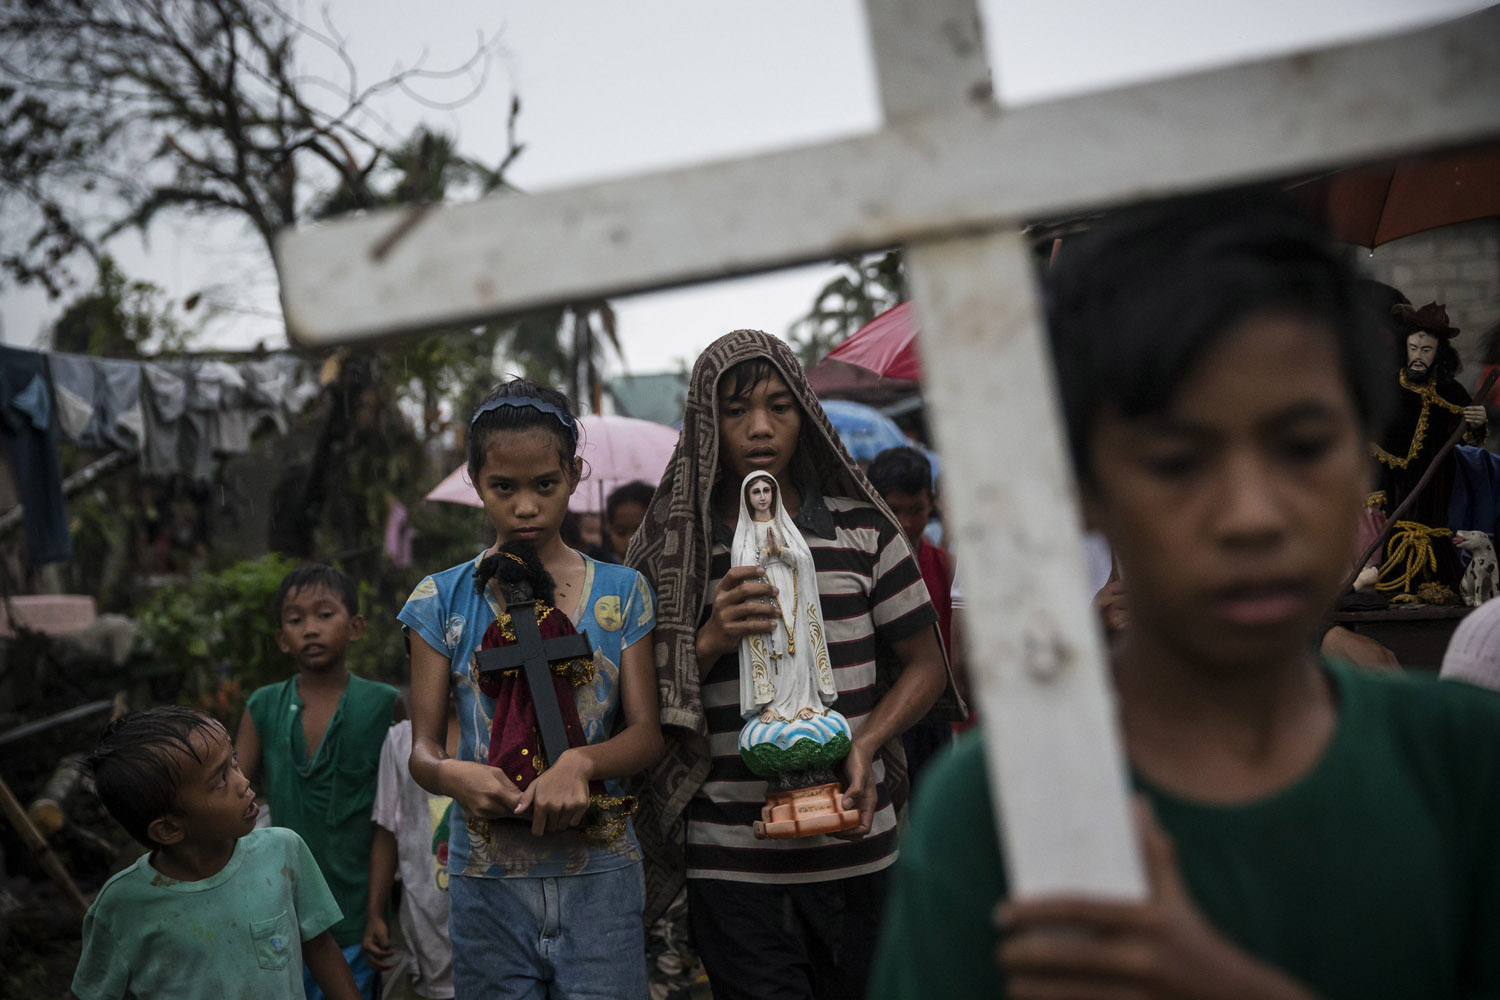 Nov. 22, 2013. Villagers carry religious statues during a procession before taking part in a Latin mass ceremony at a local Chapel in Santa Rita township in Eastern Samar, Philippines.